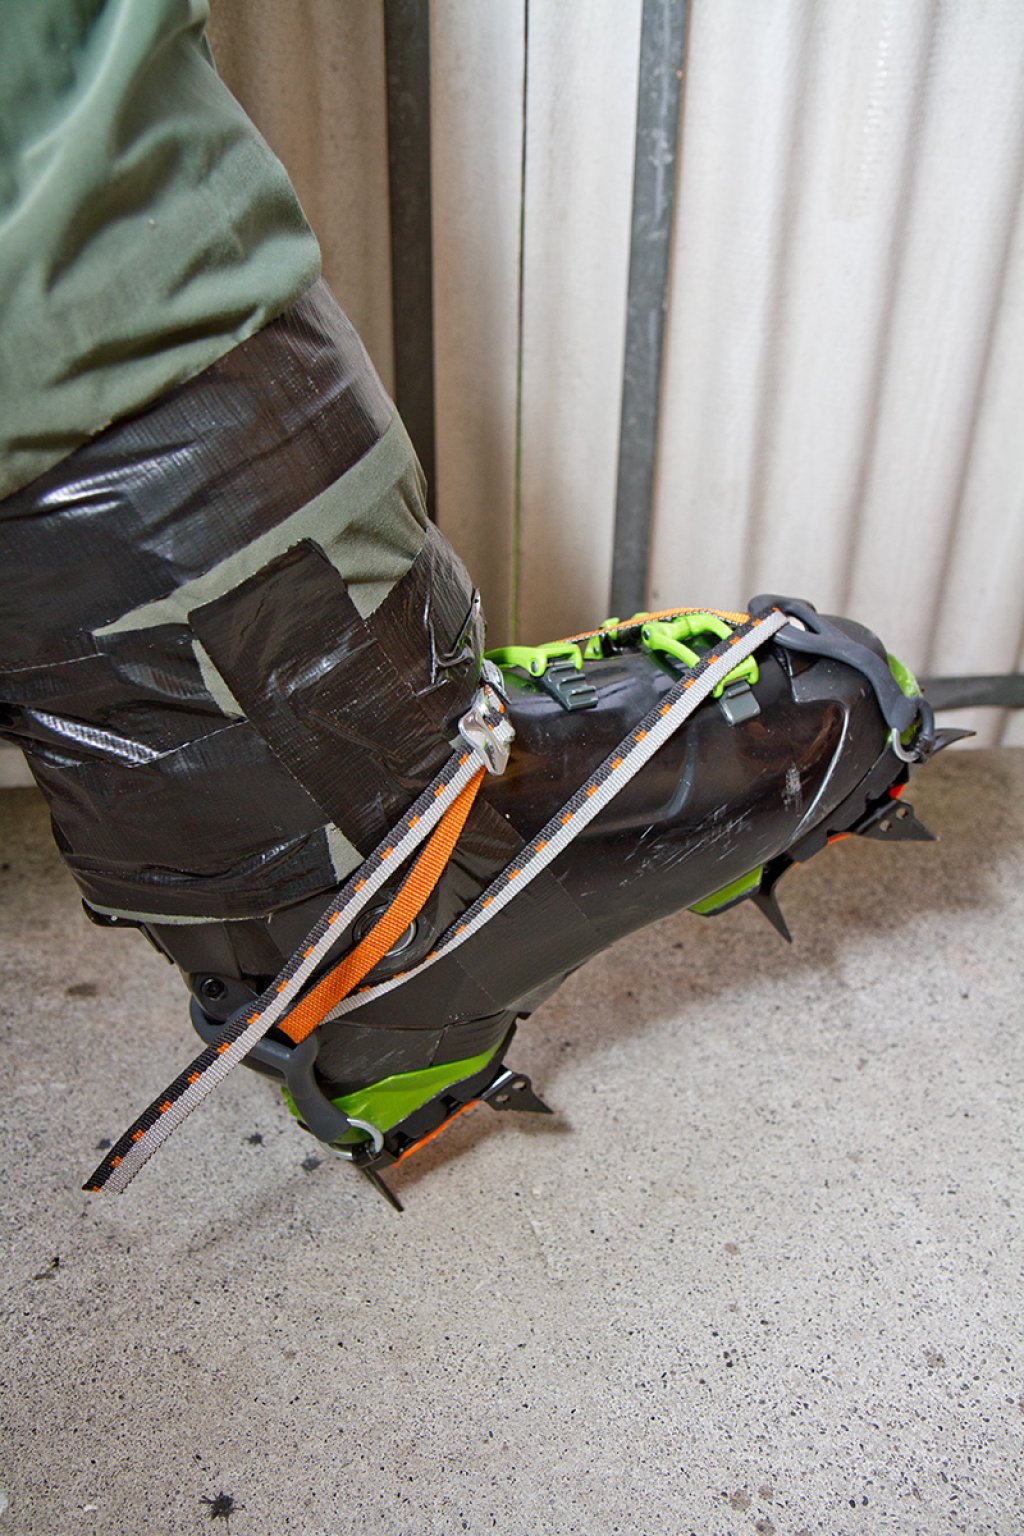 No gaiters packed?  - Duct tape ftw!